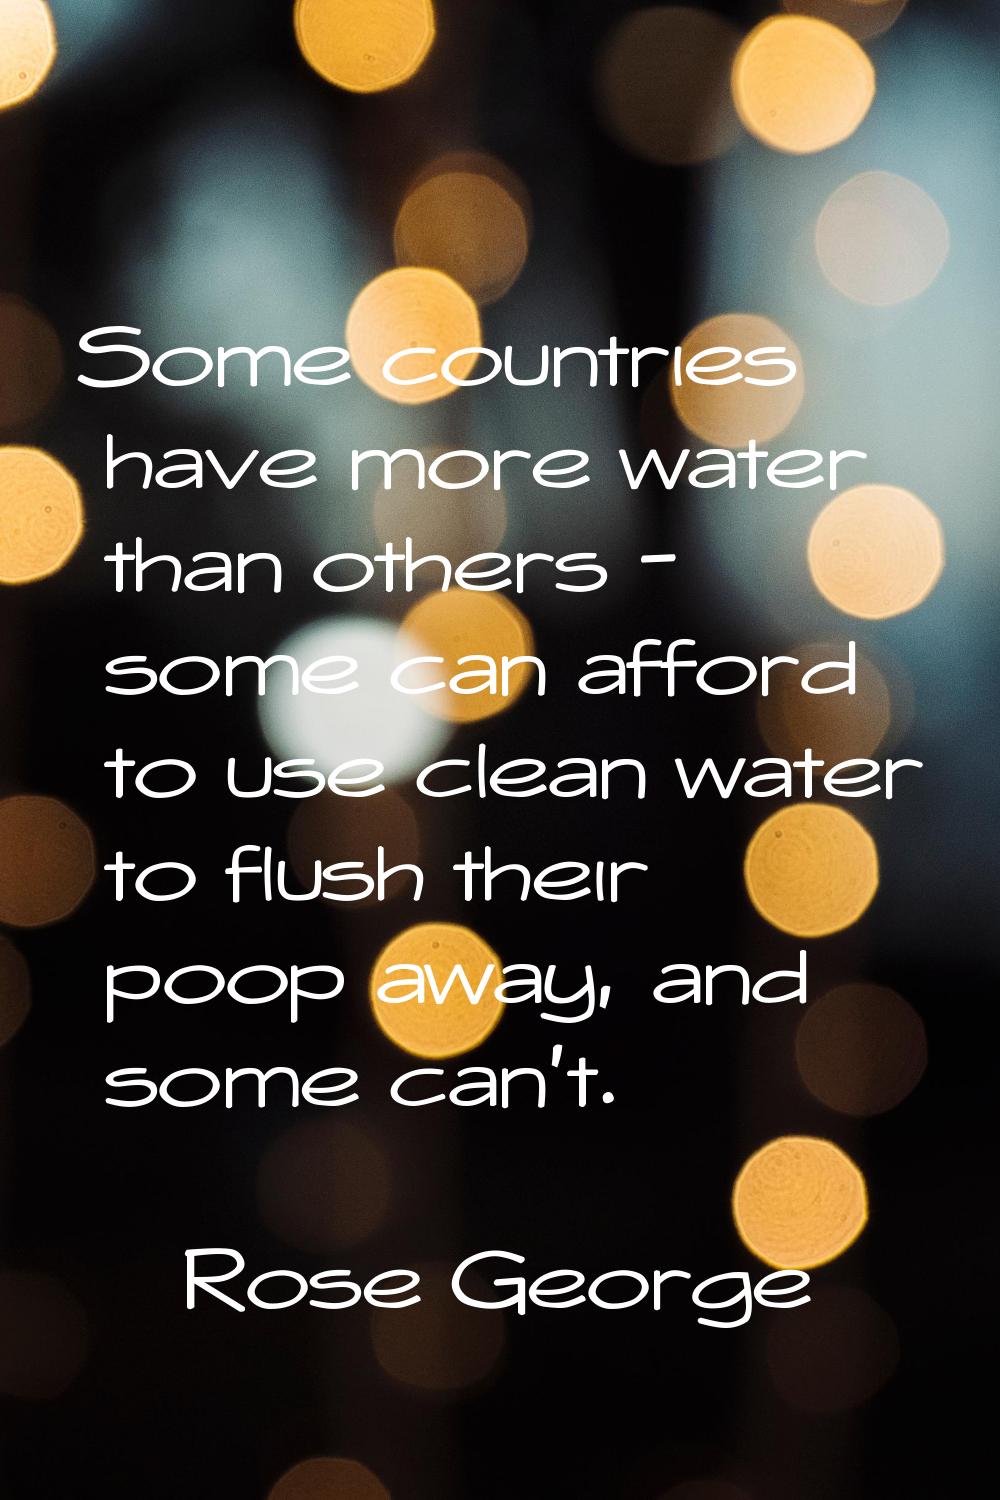 Some countries have more water than others - some can afford to use clean water to flush their poop